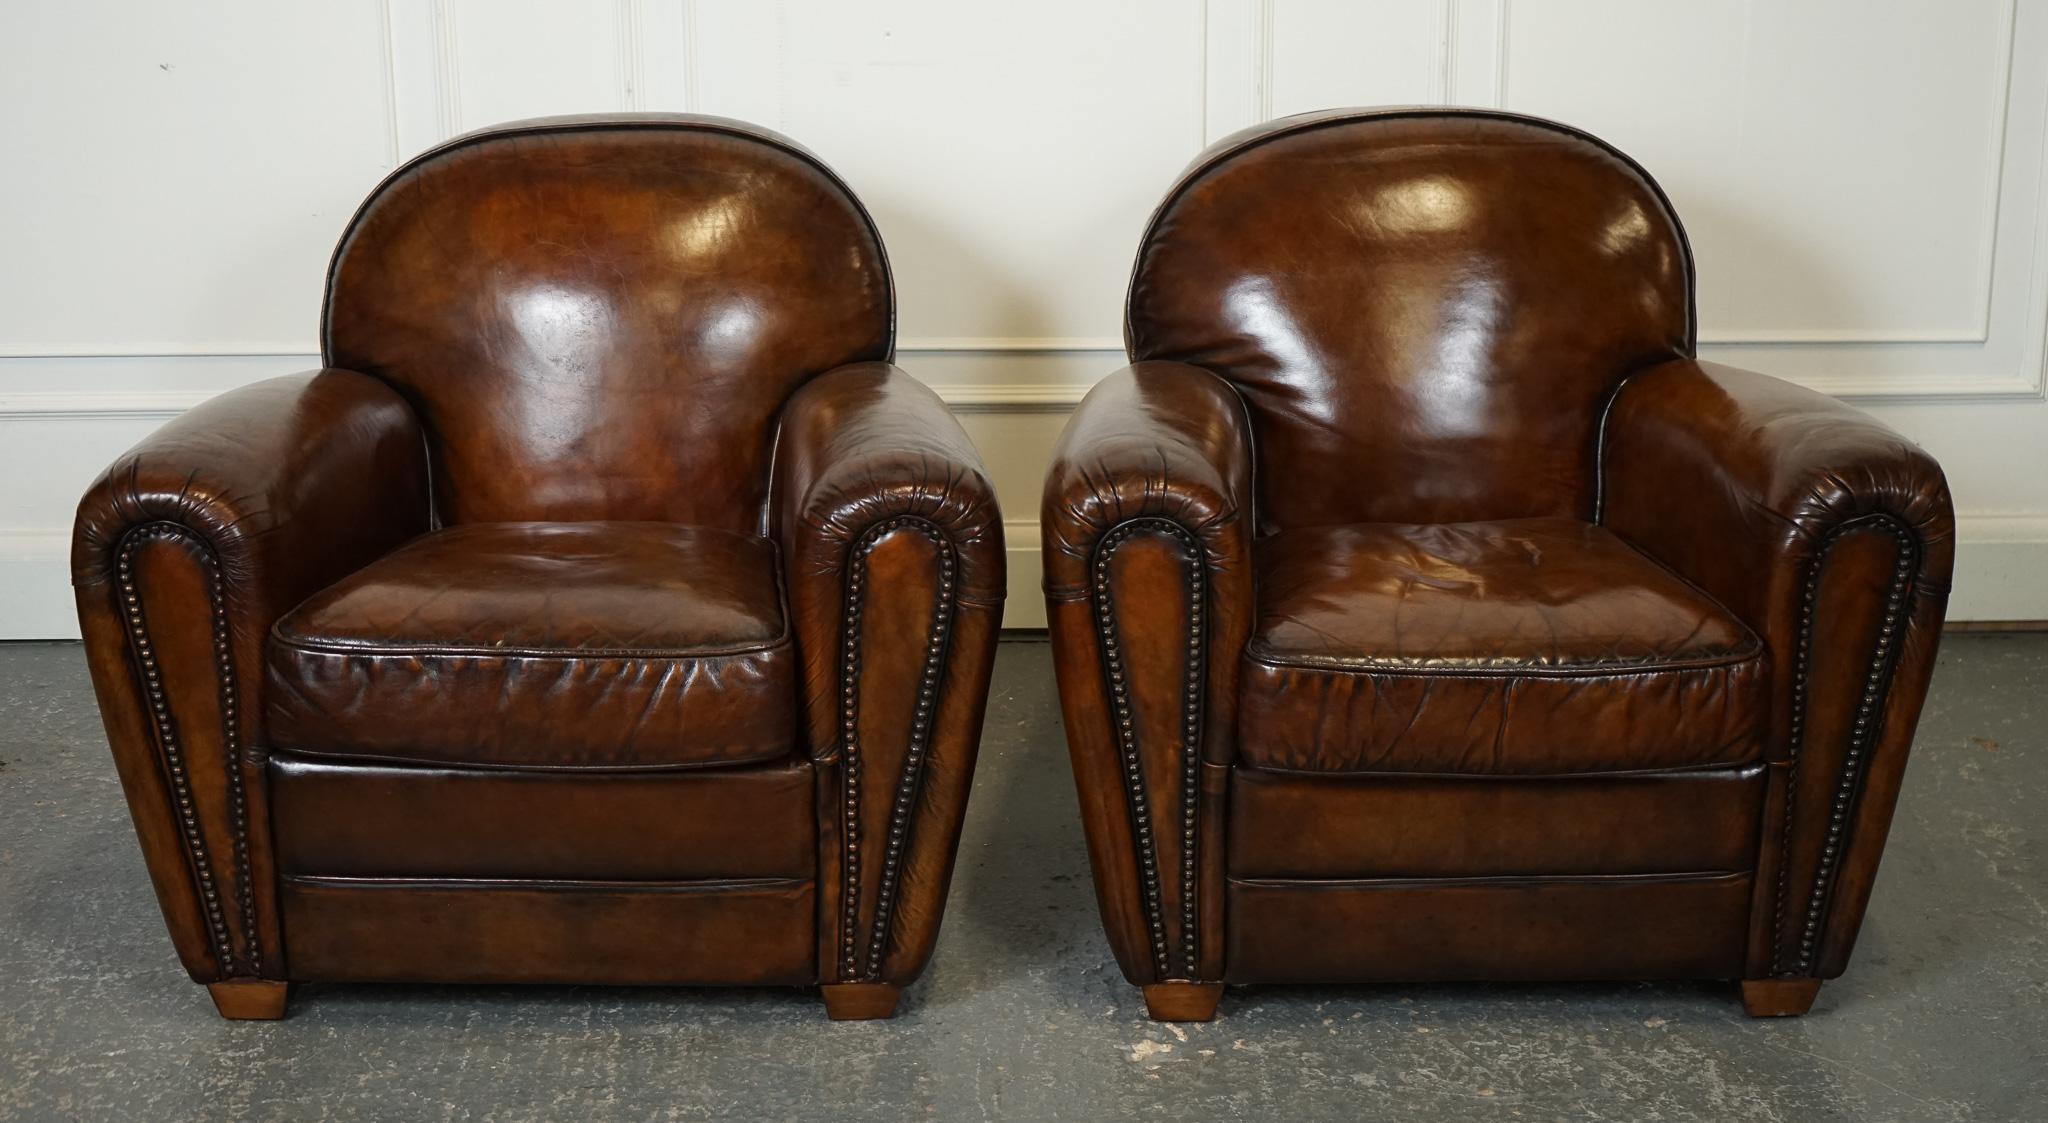 STUNNING PAiR OF ART DECO Style HAND DYED WHISKEY BROWN CLUB ARMCHAIRS (Art déco) im Angebot